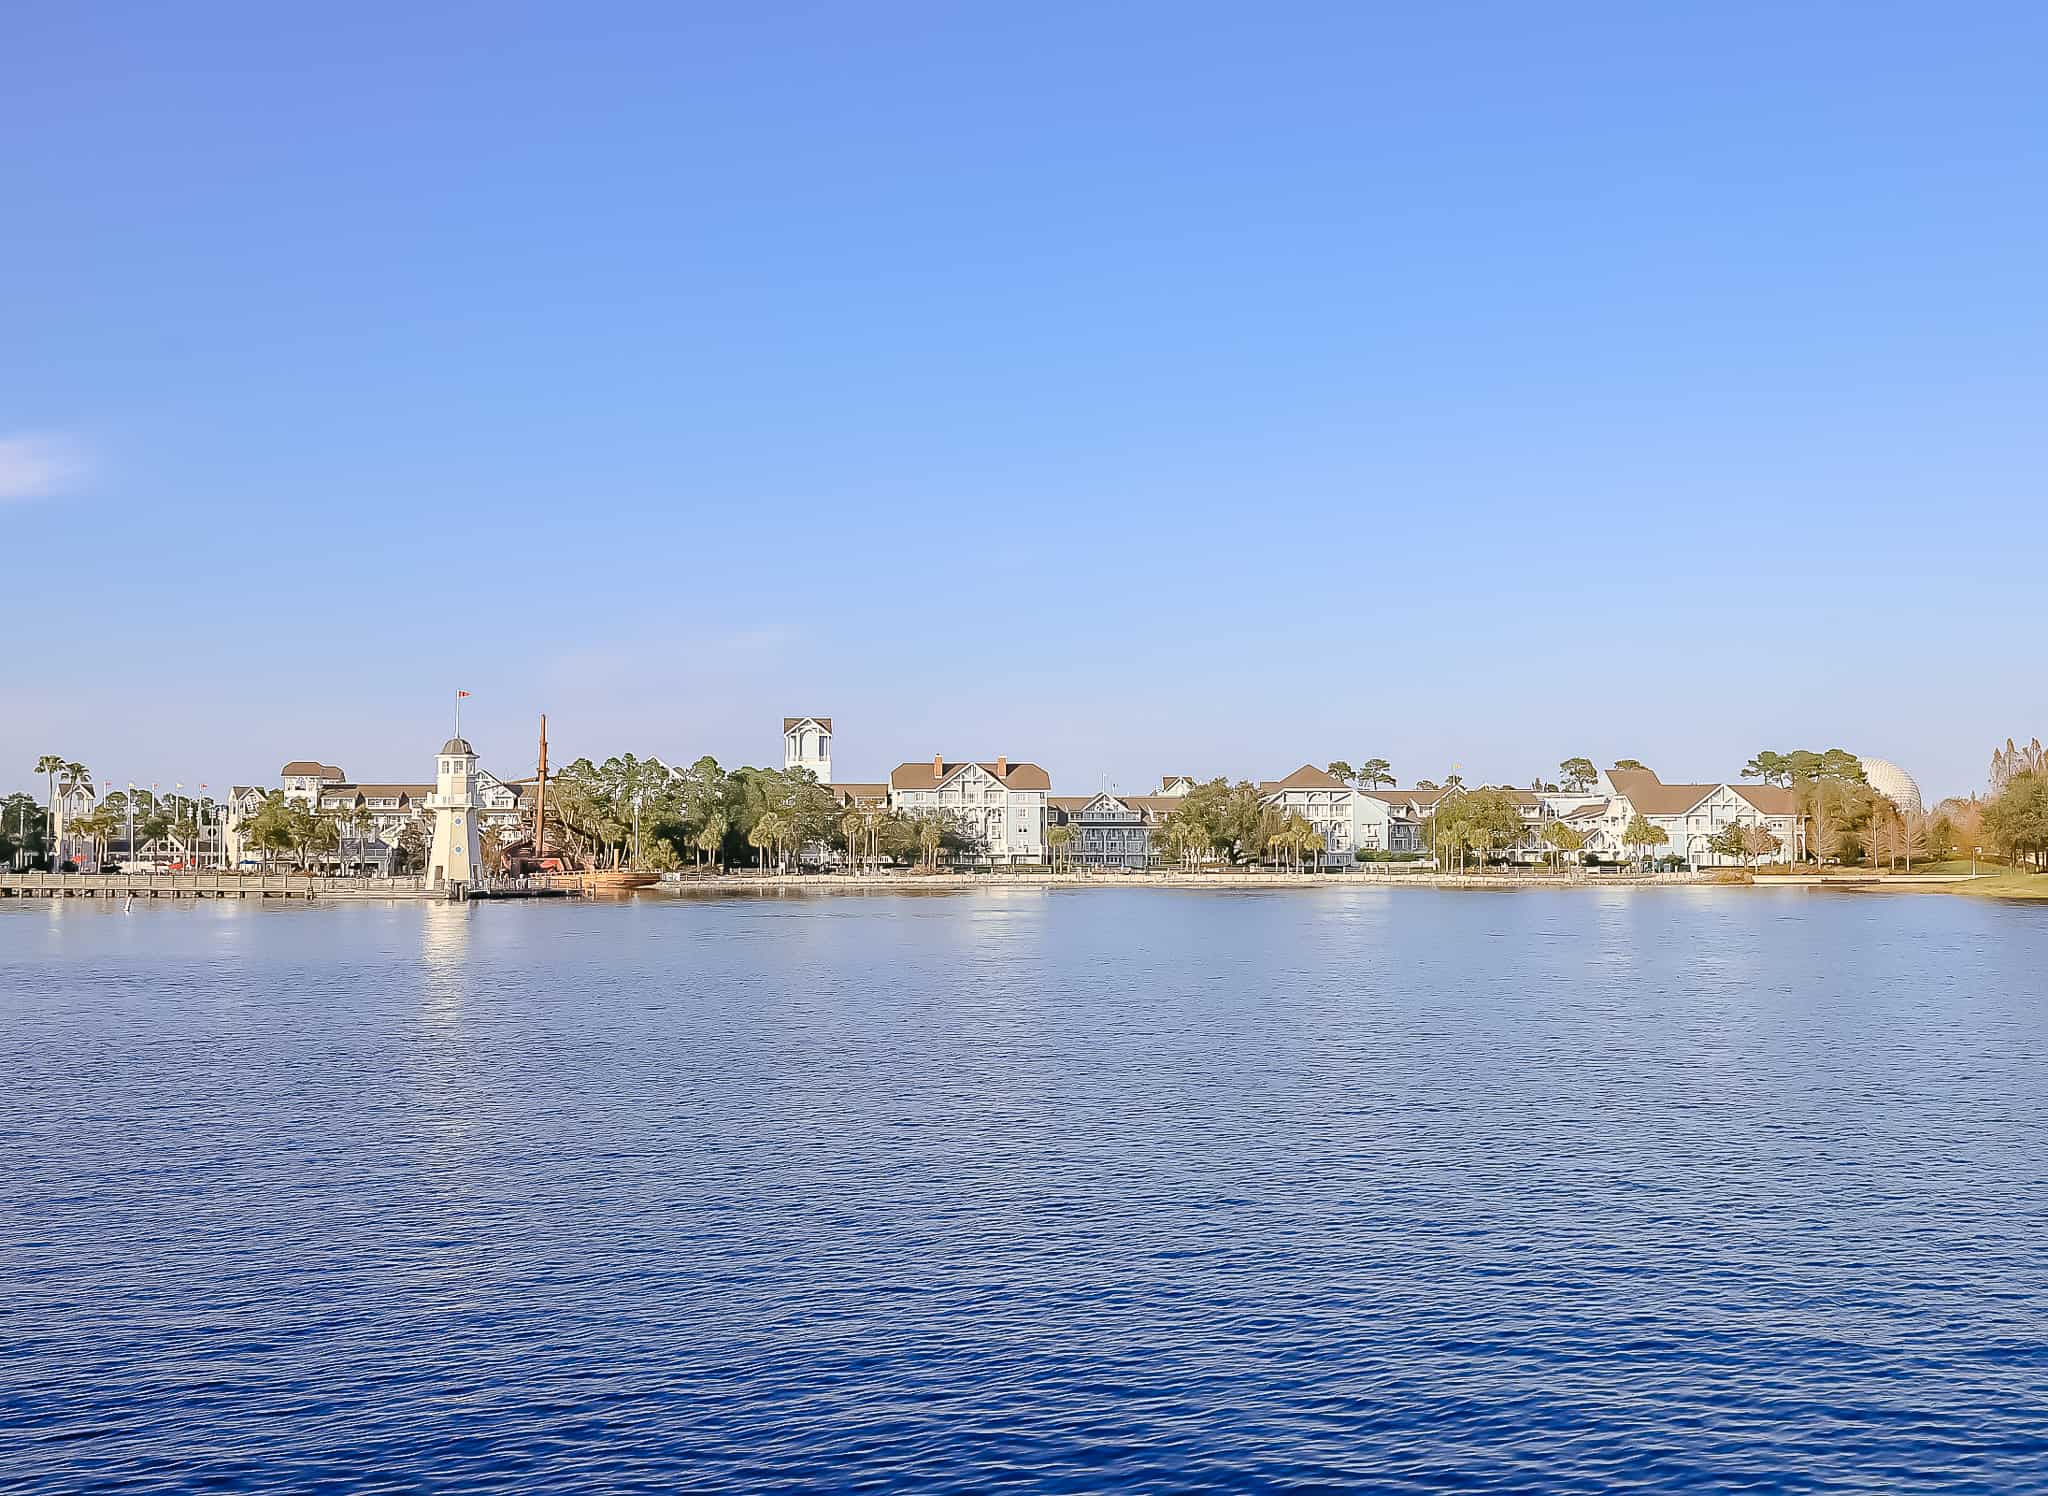 A wide angle of Disney's Beach Club sitting on the shore of Crescent Lake with Epcot's Spaceship Earth behind it.